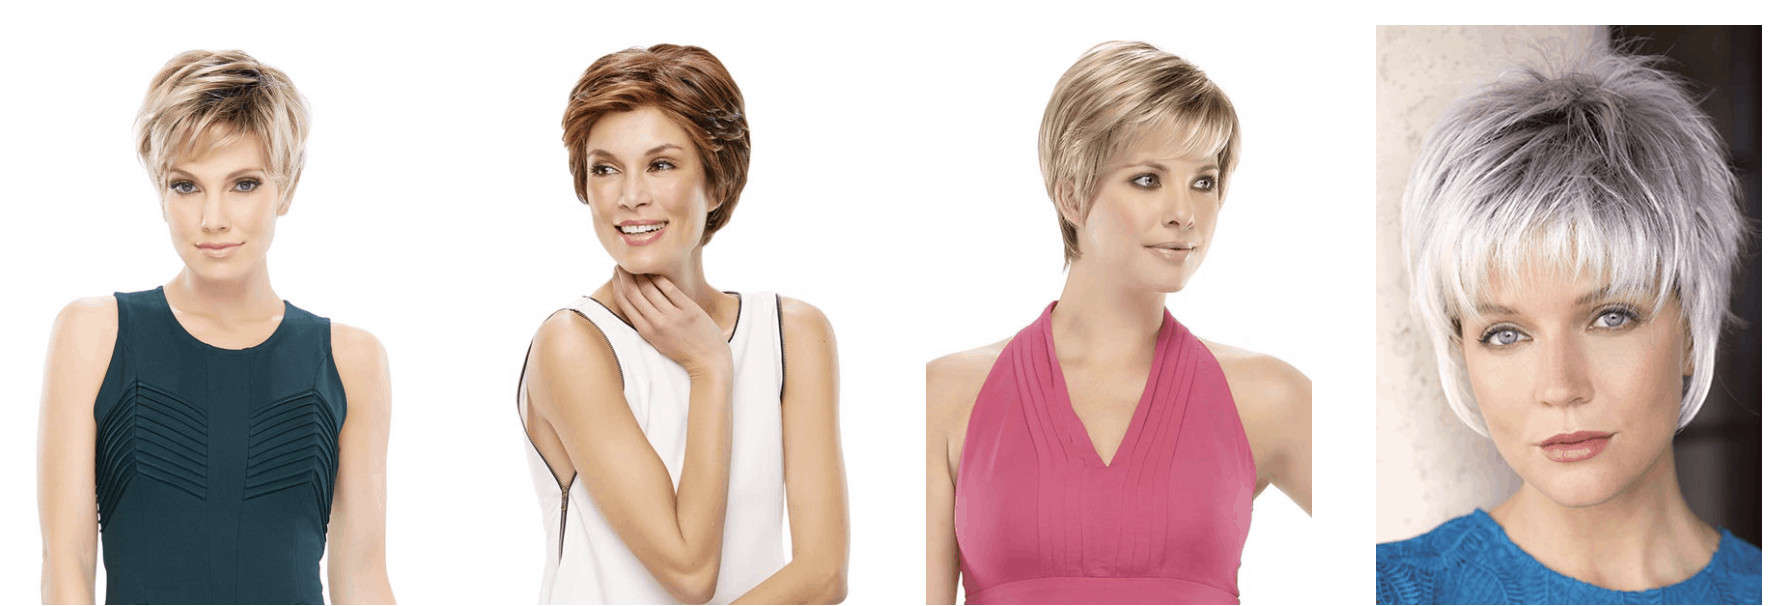 Pixie Hairstyle Wig Examples